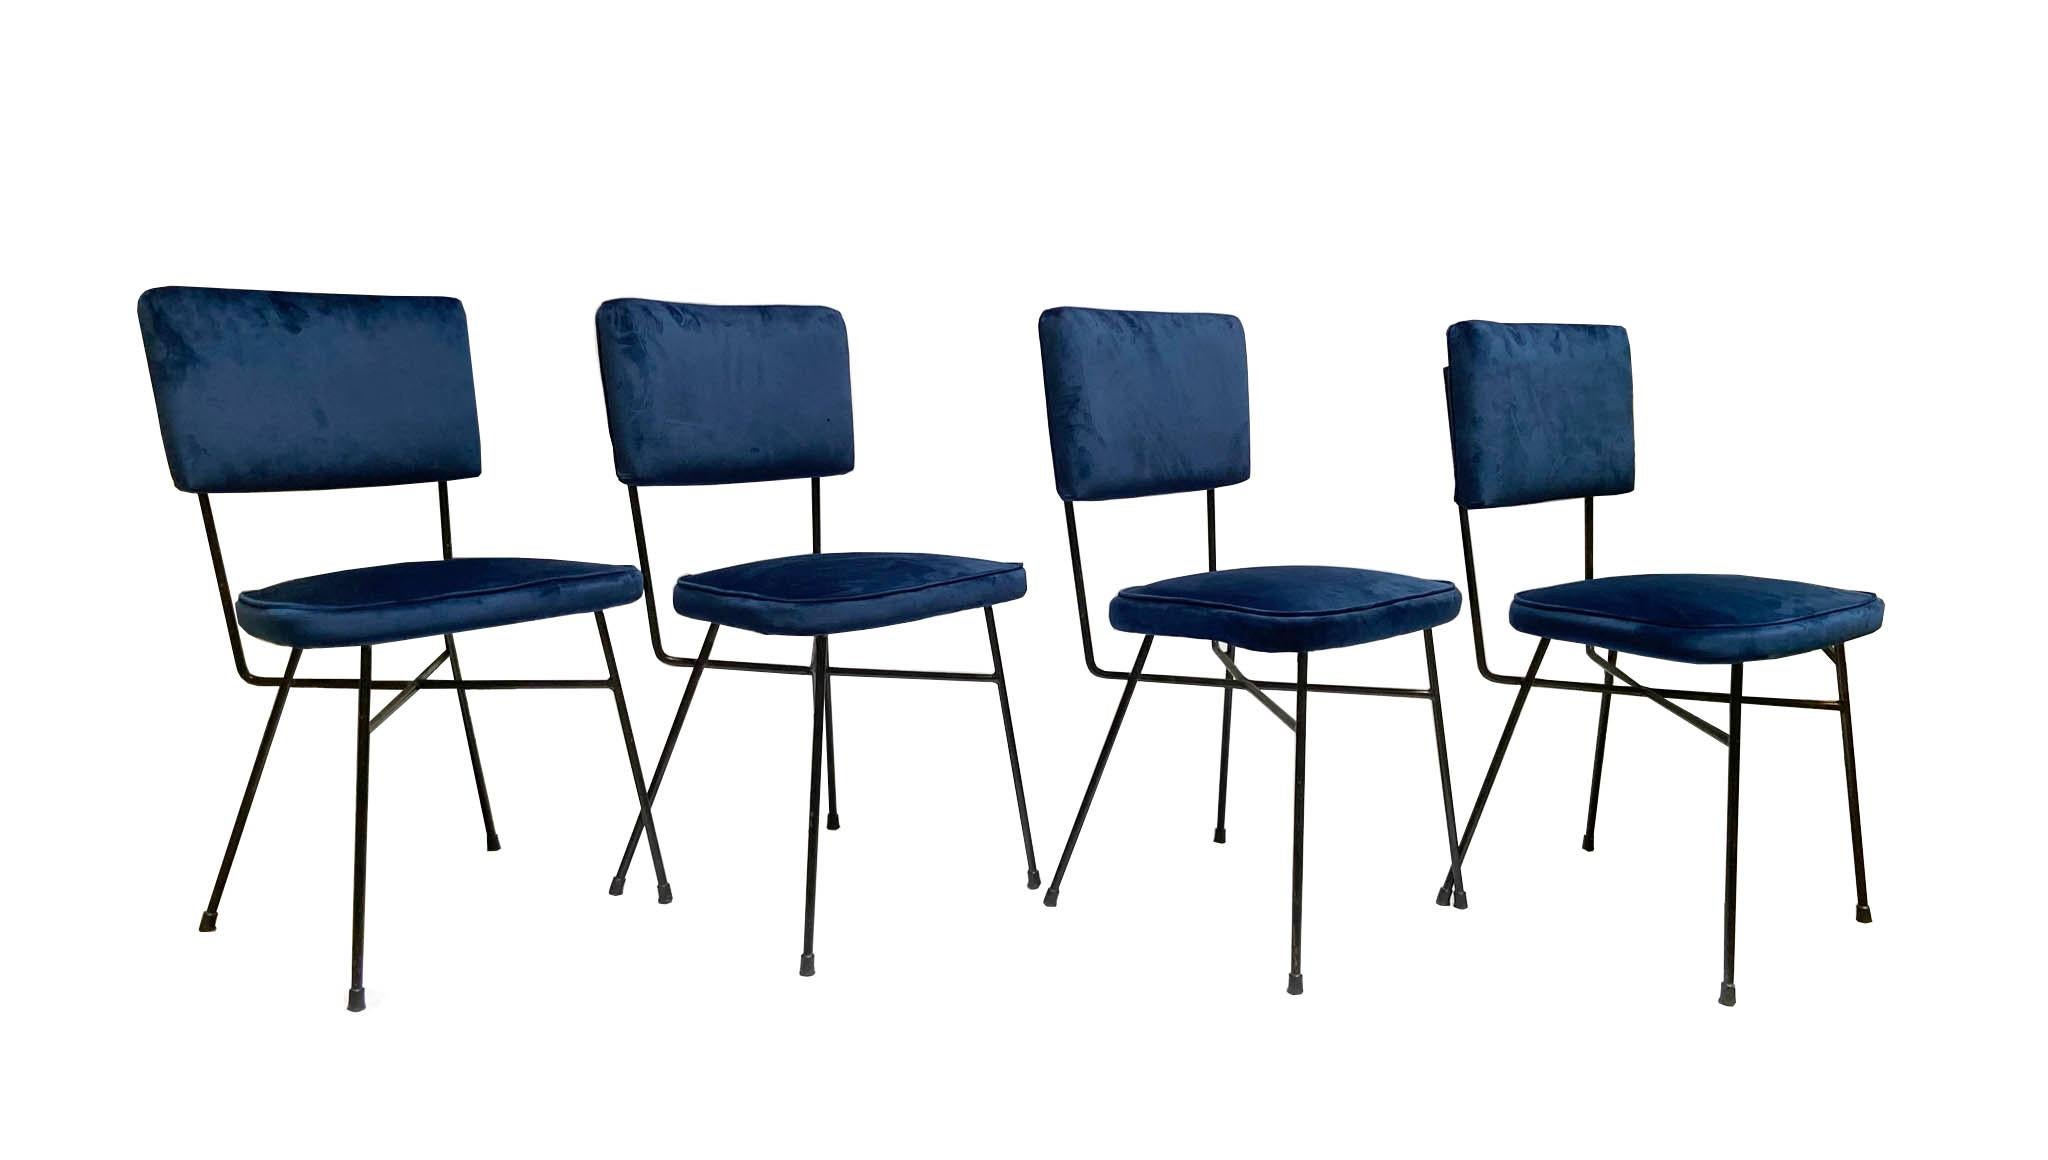 Group of four Elettra chairs by Studio BBPR for Arflex, 1953. 
Iconic Italian chair by Arflex published in 1953, structure made of black metal tubing that intersects under the seat, at the central point. 
The comfortable and wide seat is recently